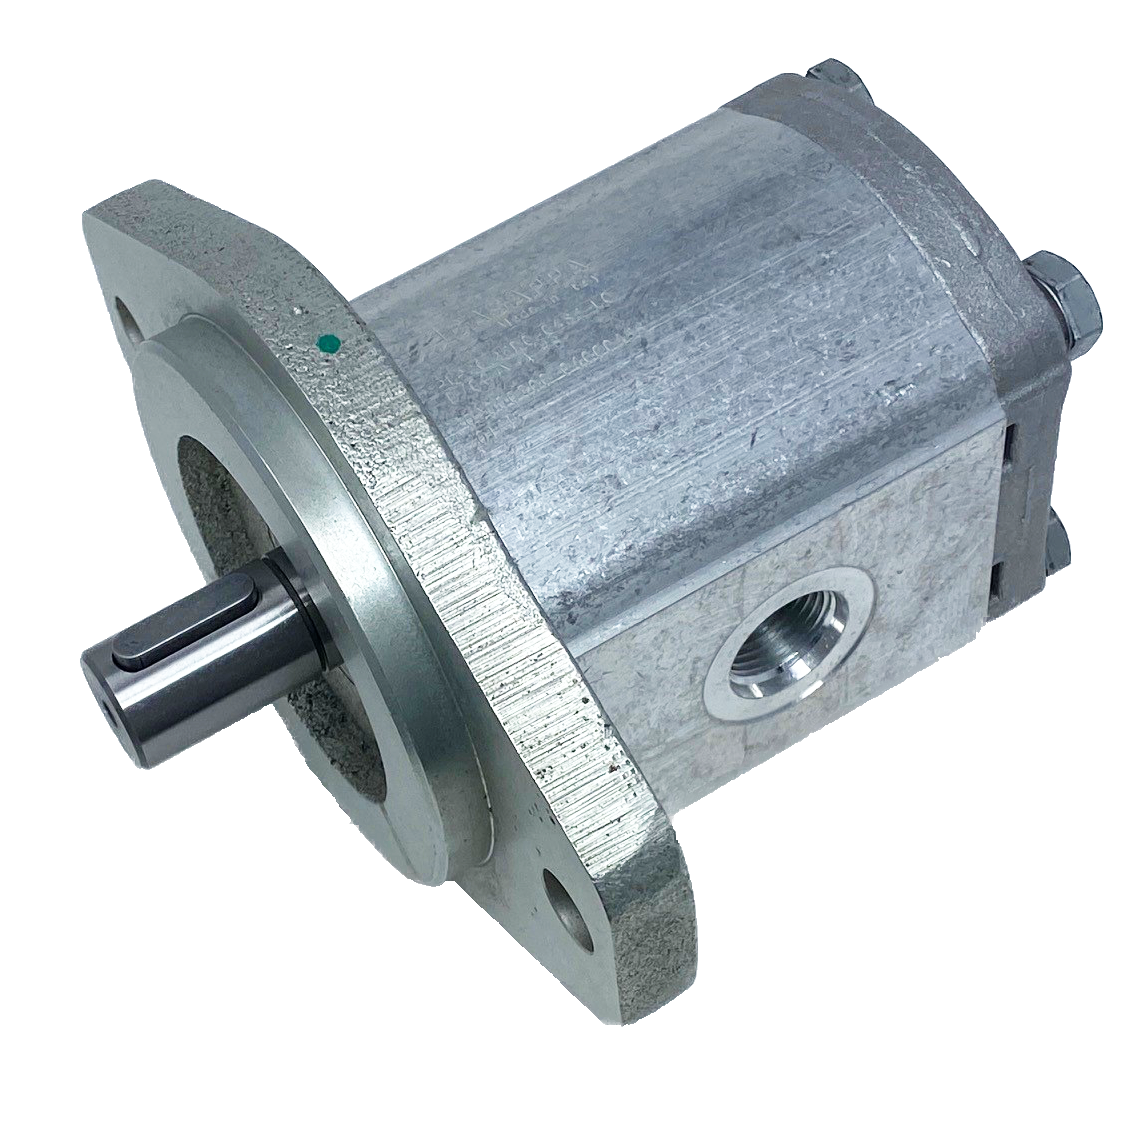 PHM20.25R0-32S5-LOC/OG-N-L : Casappa Polaris Gear Motor, 26.42cc, 3335psi, 3000RPM, Reversible, External Drain, 3/4" Bore x 1/4" Key Shaft, SAE B 2-Bolt Flange, 0.625 (5/8") #10 SAE In, 1.25" #20 SAE Out, Cast Iron Body Cast Iron Flange And Cover